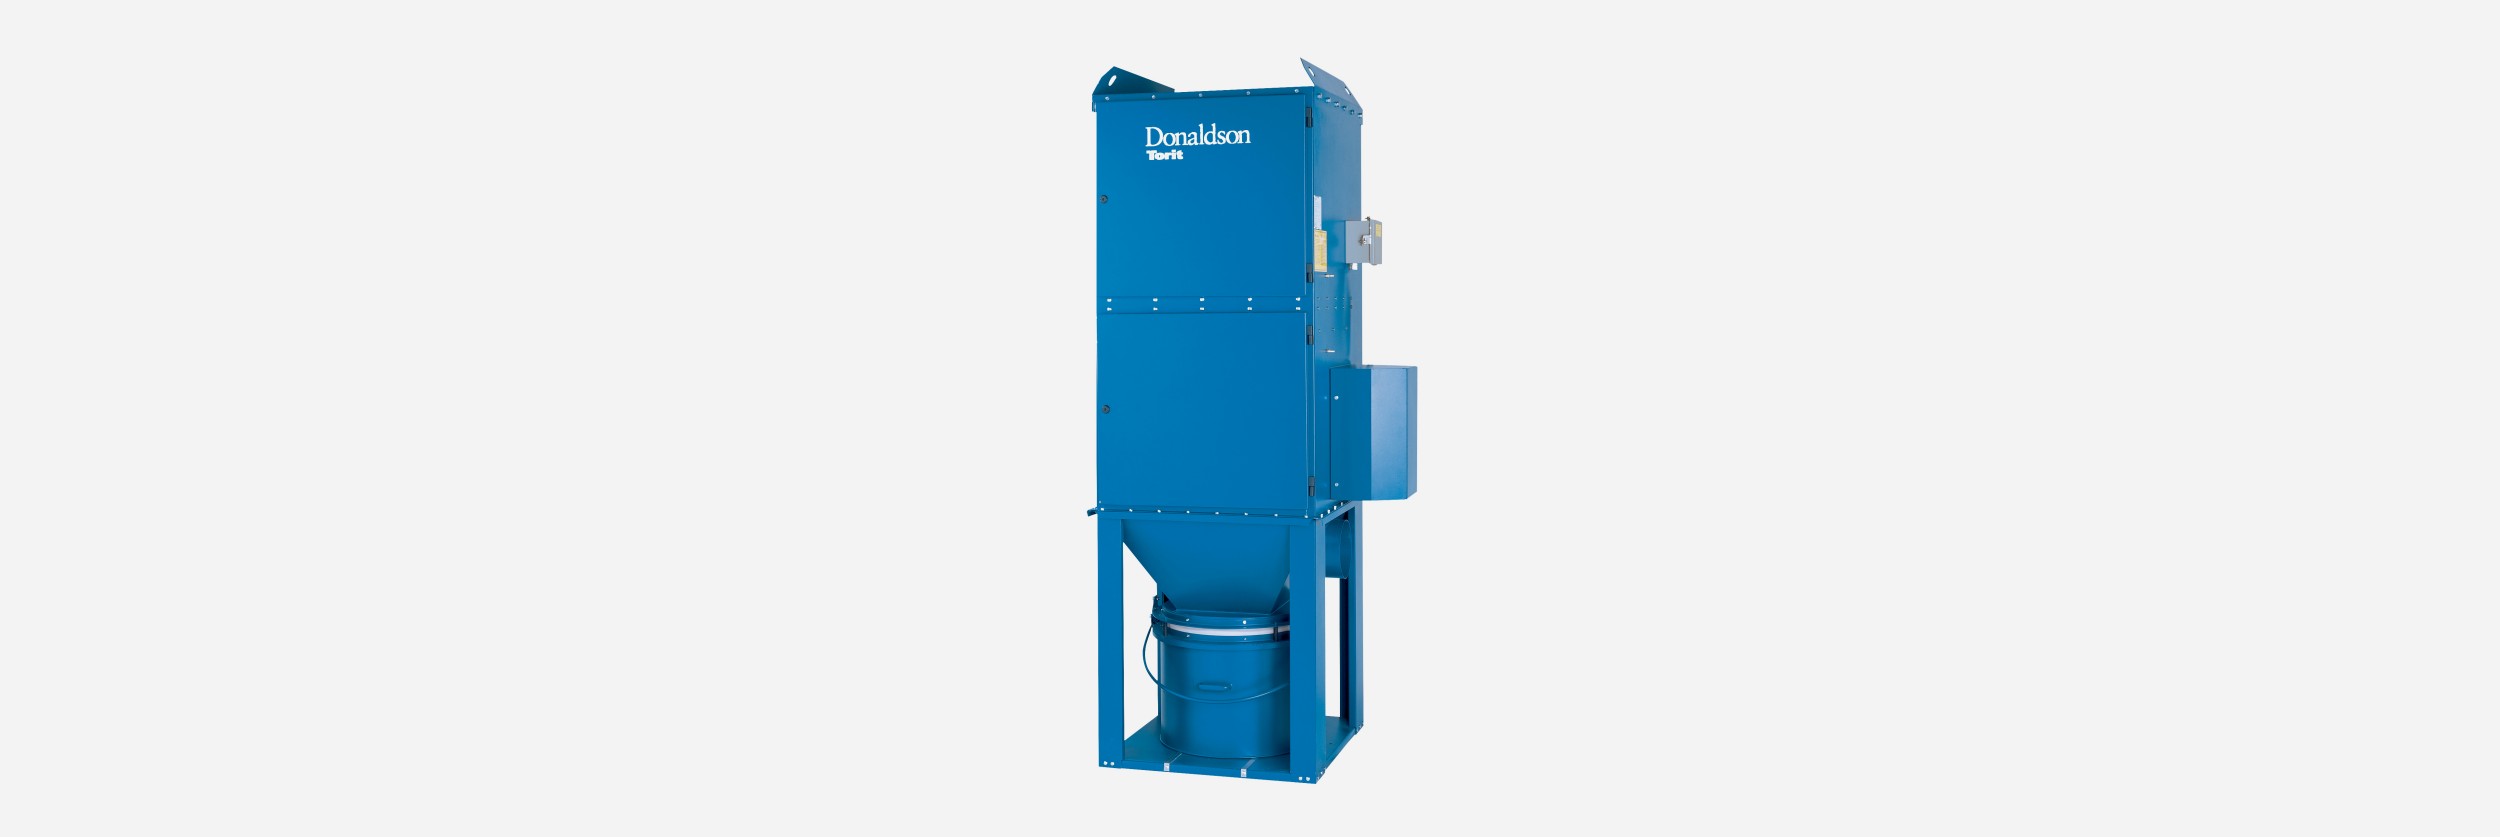 Donaldson Unimaster Baghouse Dust Collector hero image | AST Canada